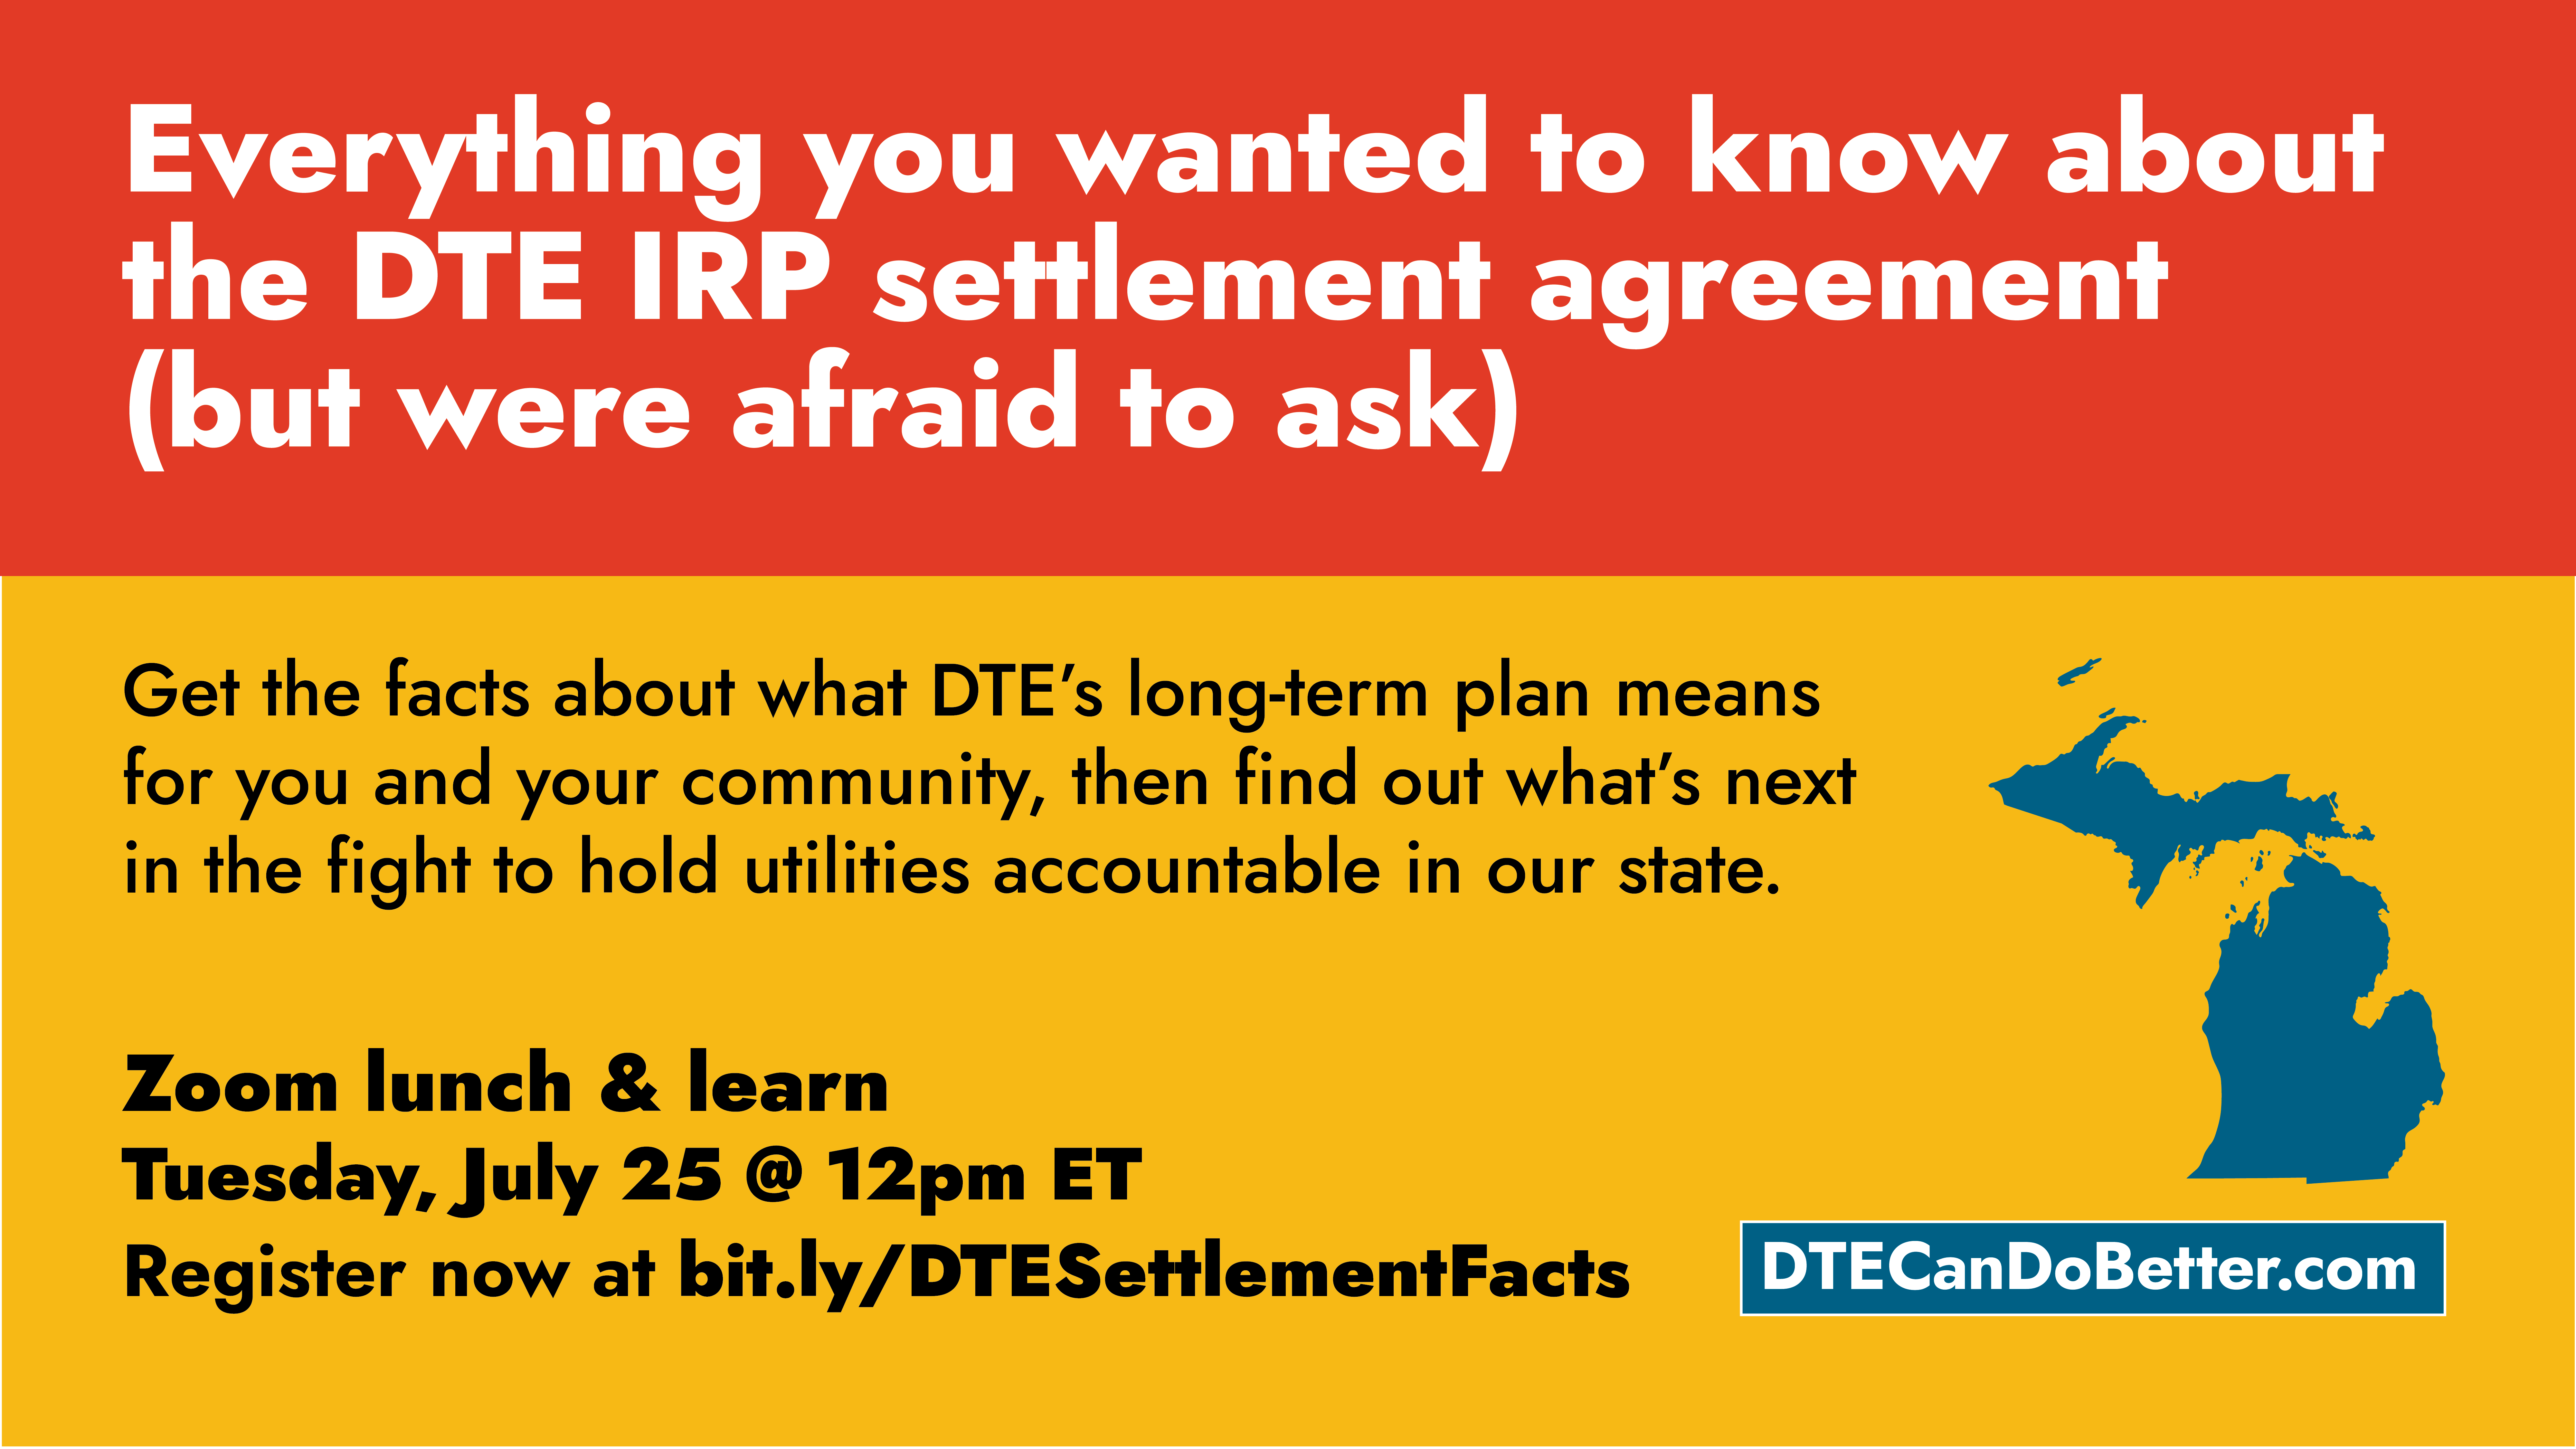 Everything you wanted to know about the DTE IRP settlement agreement (but were afraid to ask). Get the facts about what DTE’s long-term plan means for your and your community, then find out what’s next in the fight to hold utilities accountable in our state. Zoom lunch & learn - Tuesday, July 25 @ 12pm ET. Register now at bit.ly/DTESettlementFacts. DTECanDoBetter.com